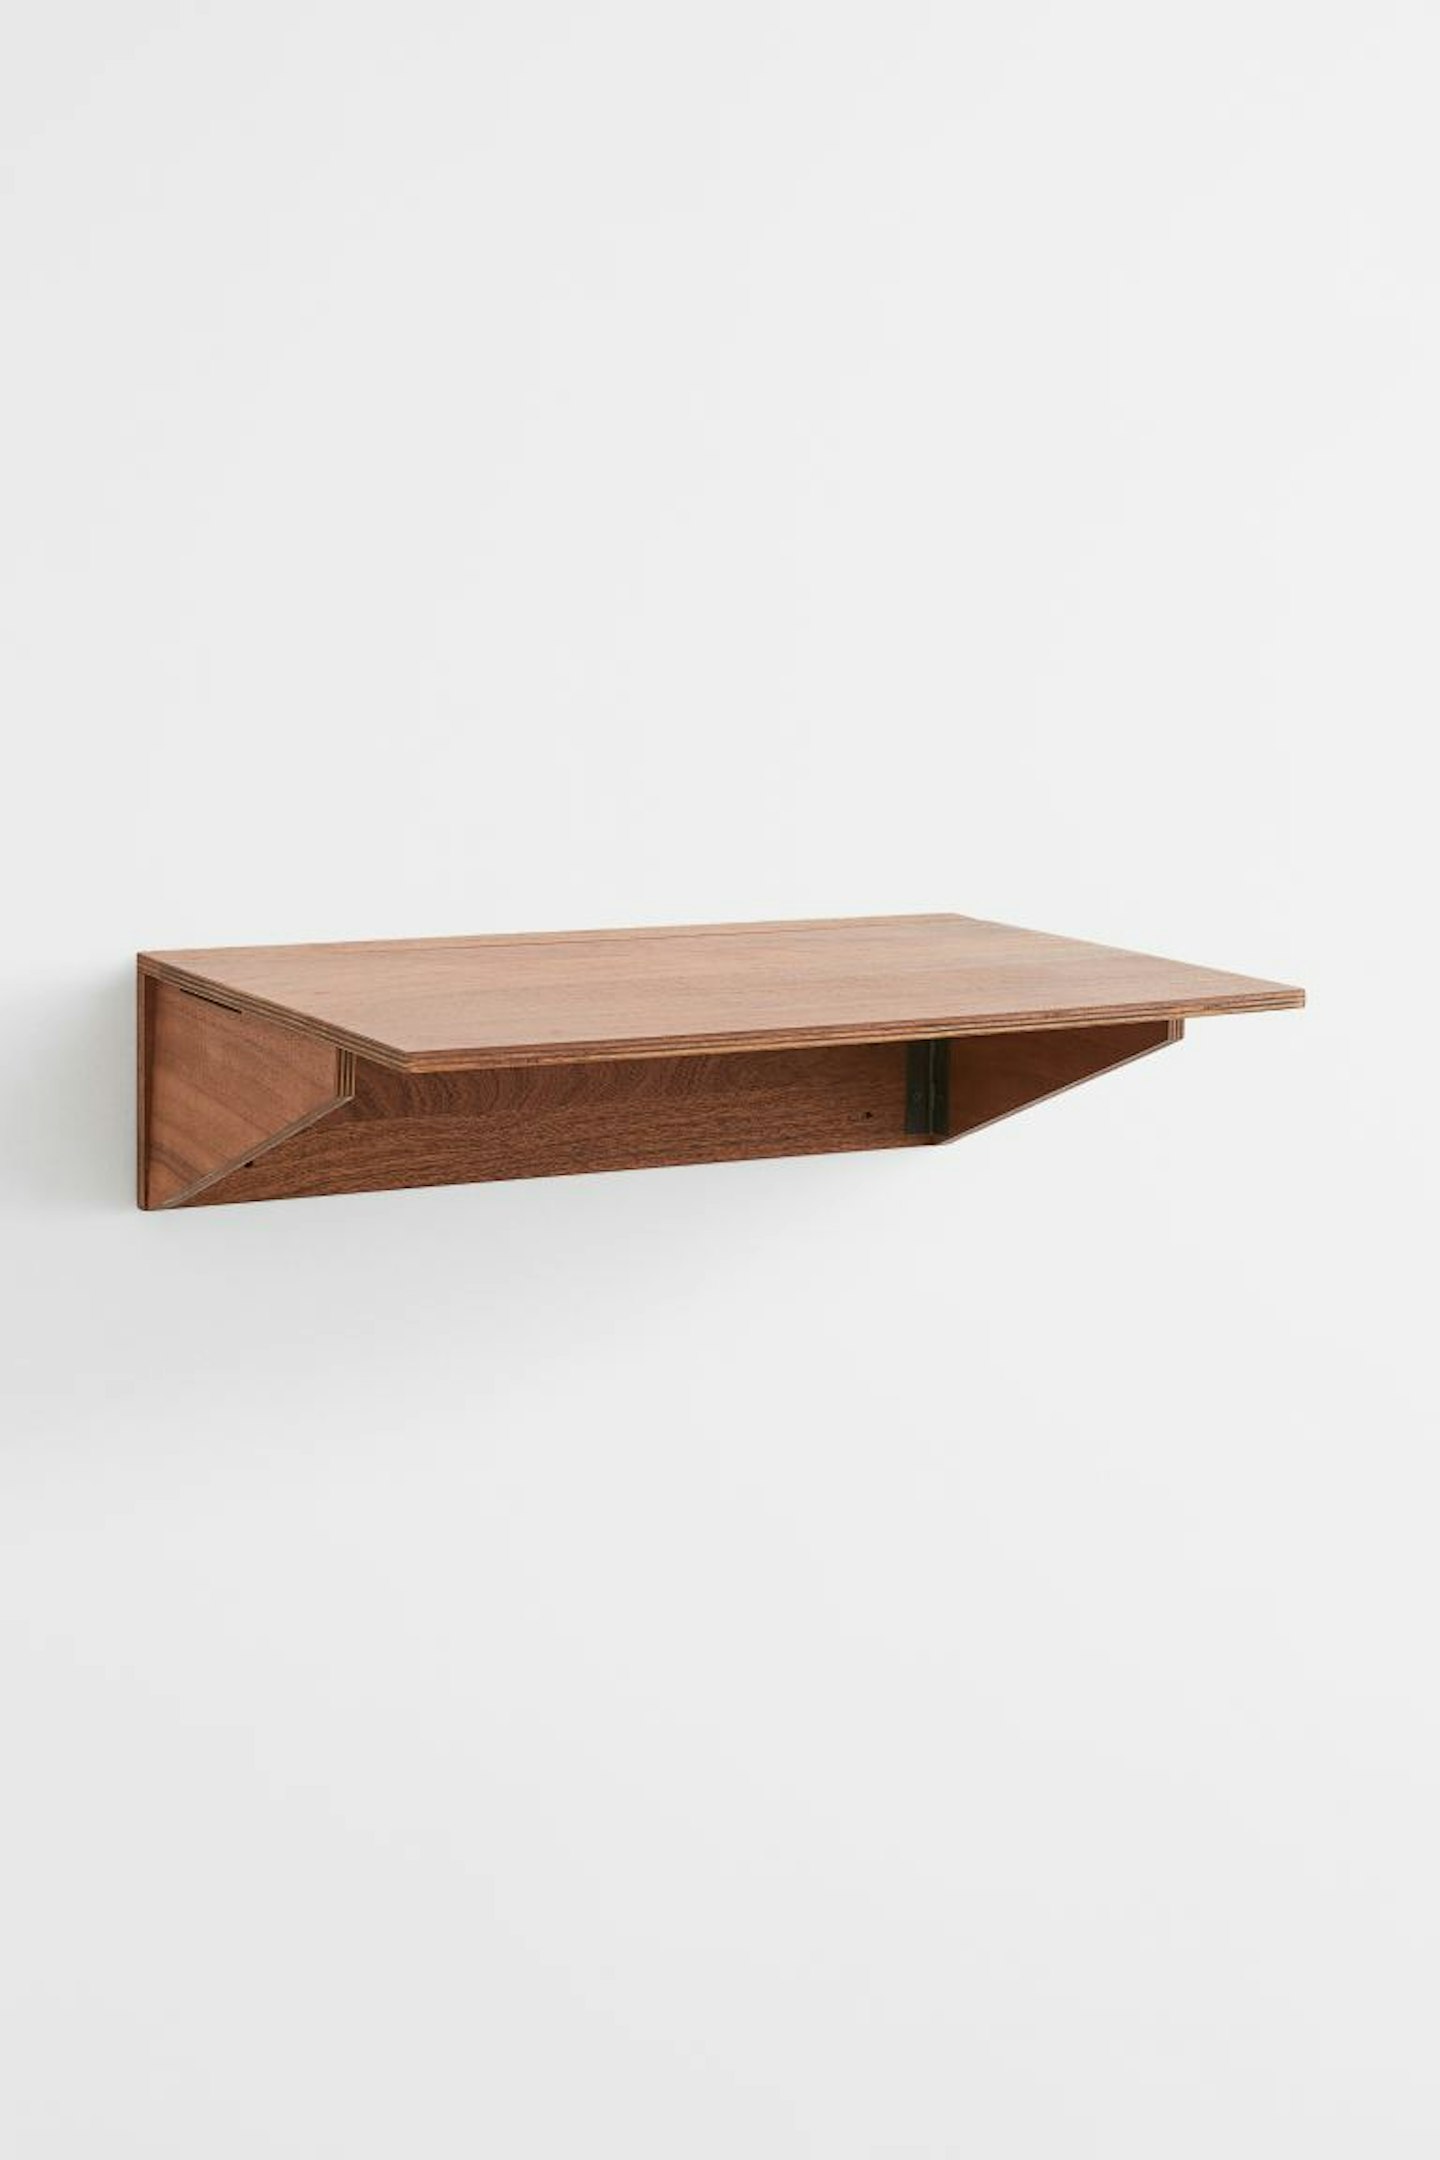 H&M, Wall-hanging desk, £39.99